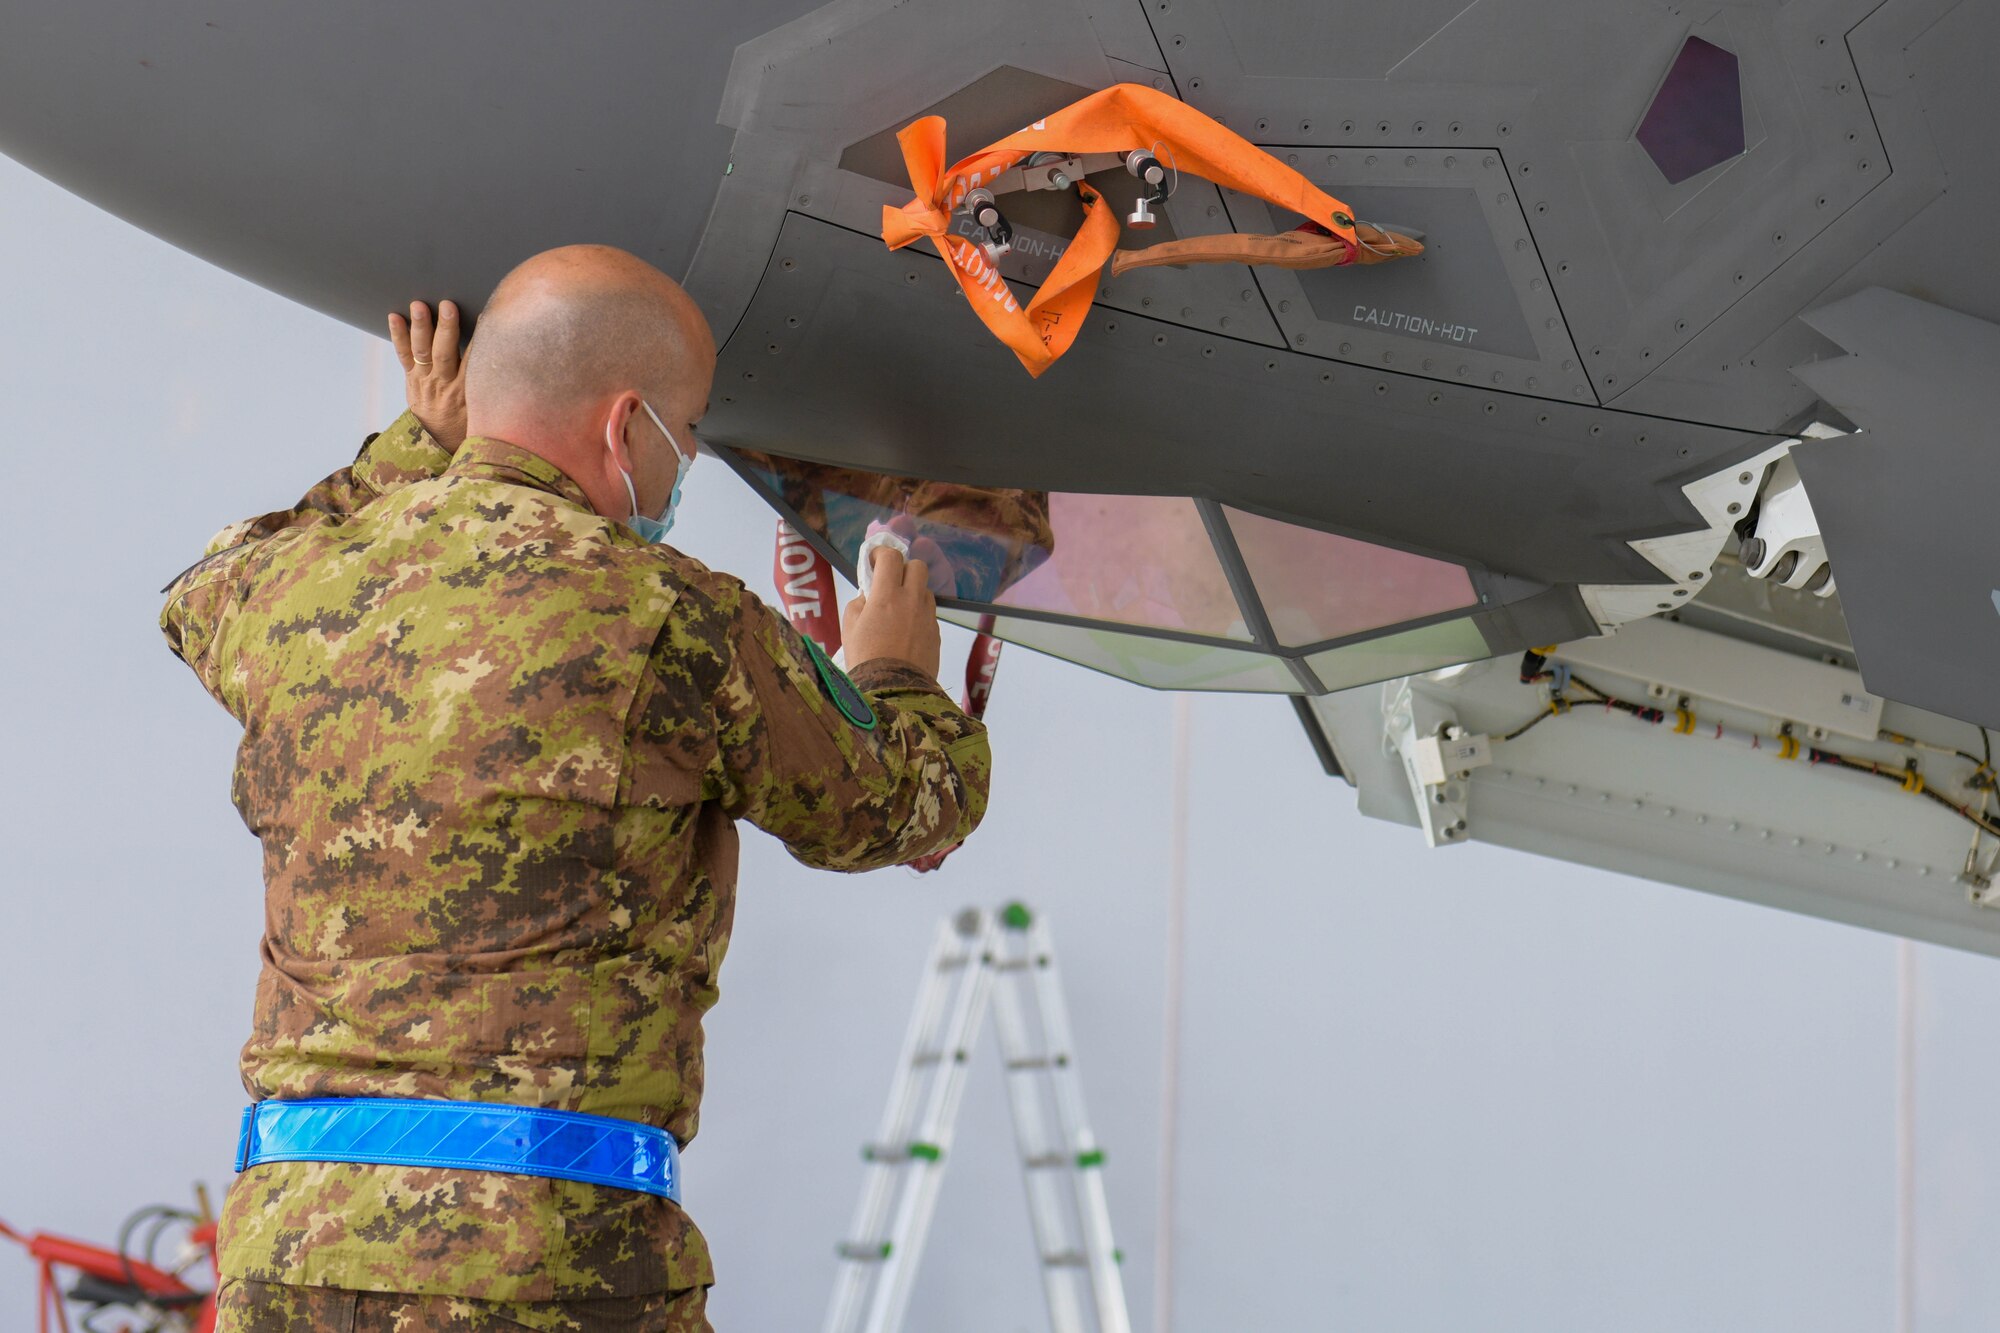 Italian air force Lt. Sebastiano Fattizzo, 13th Group F-35 Lightning II crew chief, performs cross servicing maintenance on a U.S. Air Force F-35 from the 4th Fighter Squadron, 388th Fighter Wing, during Falcon Strike 21 (FS21) at Amendola Air Base, Italy, June 7, 2021. Approximately 600 personnel from the U.S. Air Force, U.S. Marine Corps, Italian air force, Israeli air force and the United Kingdom Royal air force are participating in FS21. (U.S. Air Force photo by Airman 1st Class Brooke Moeder)